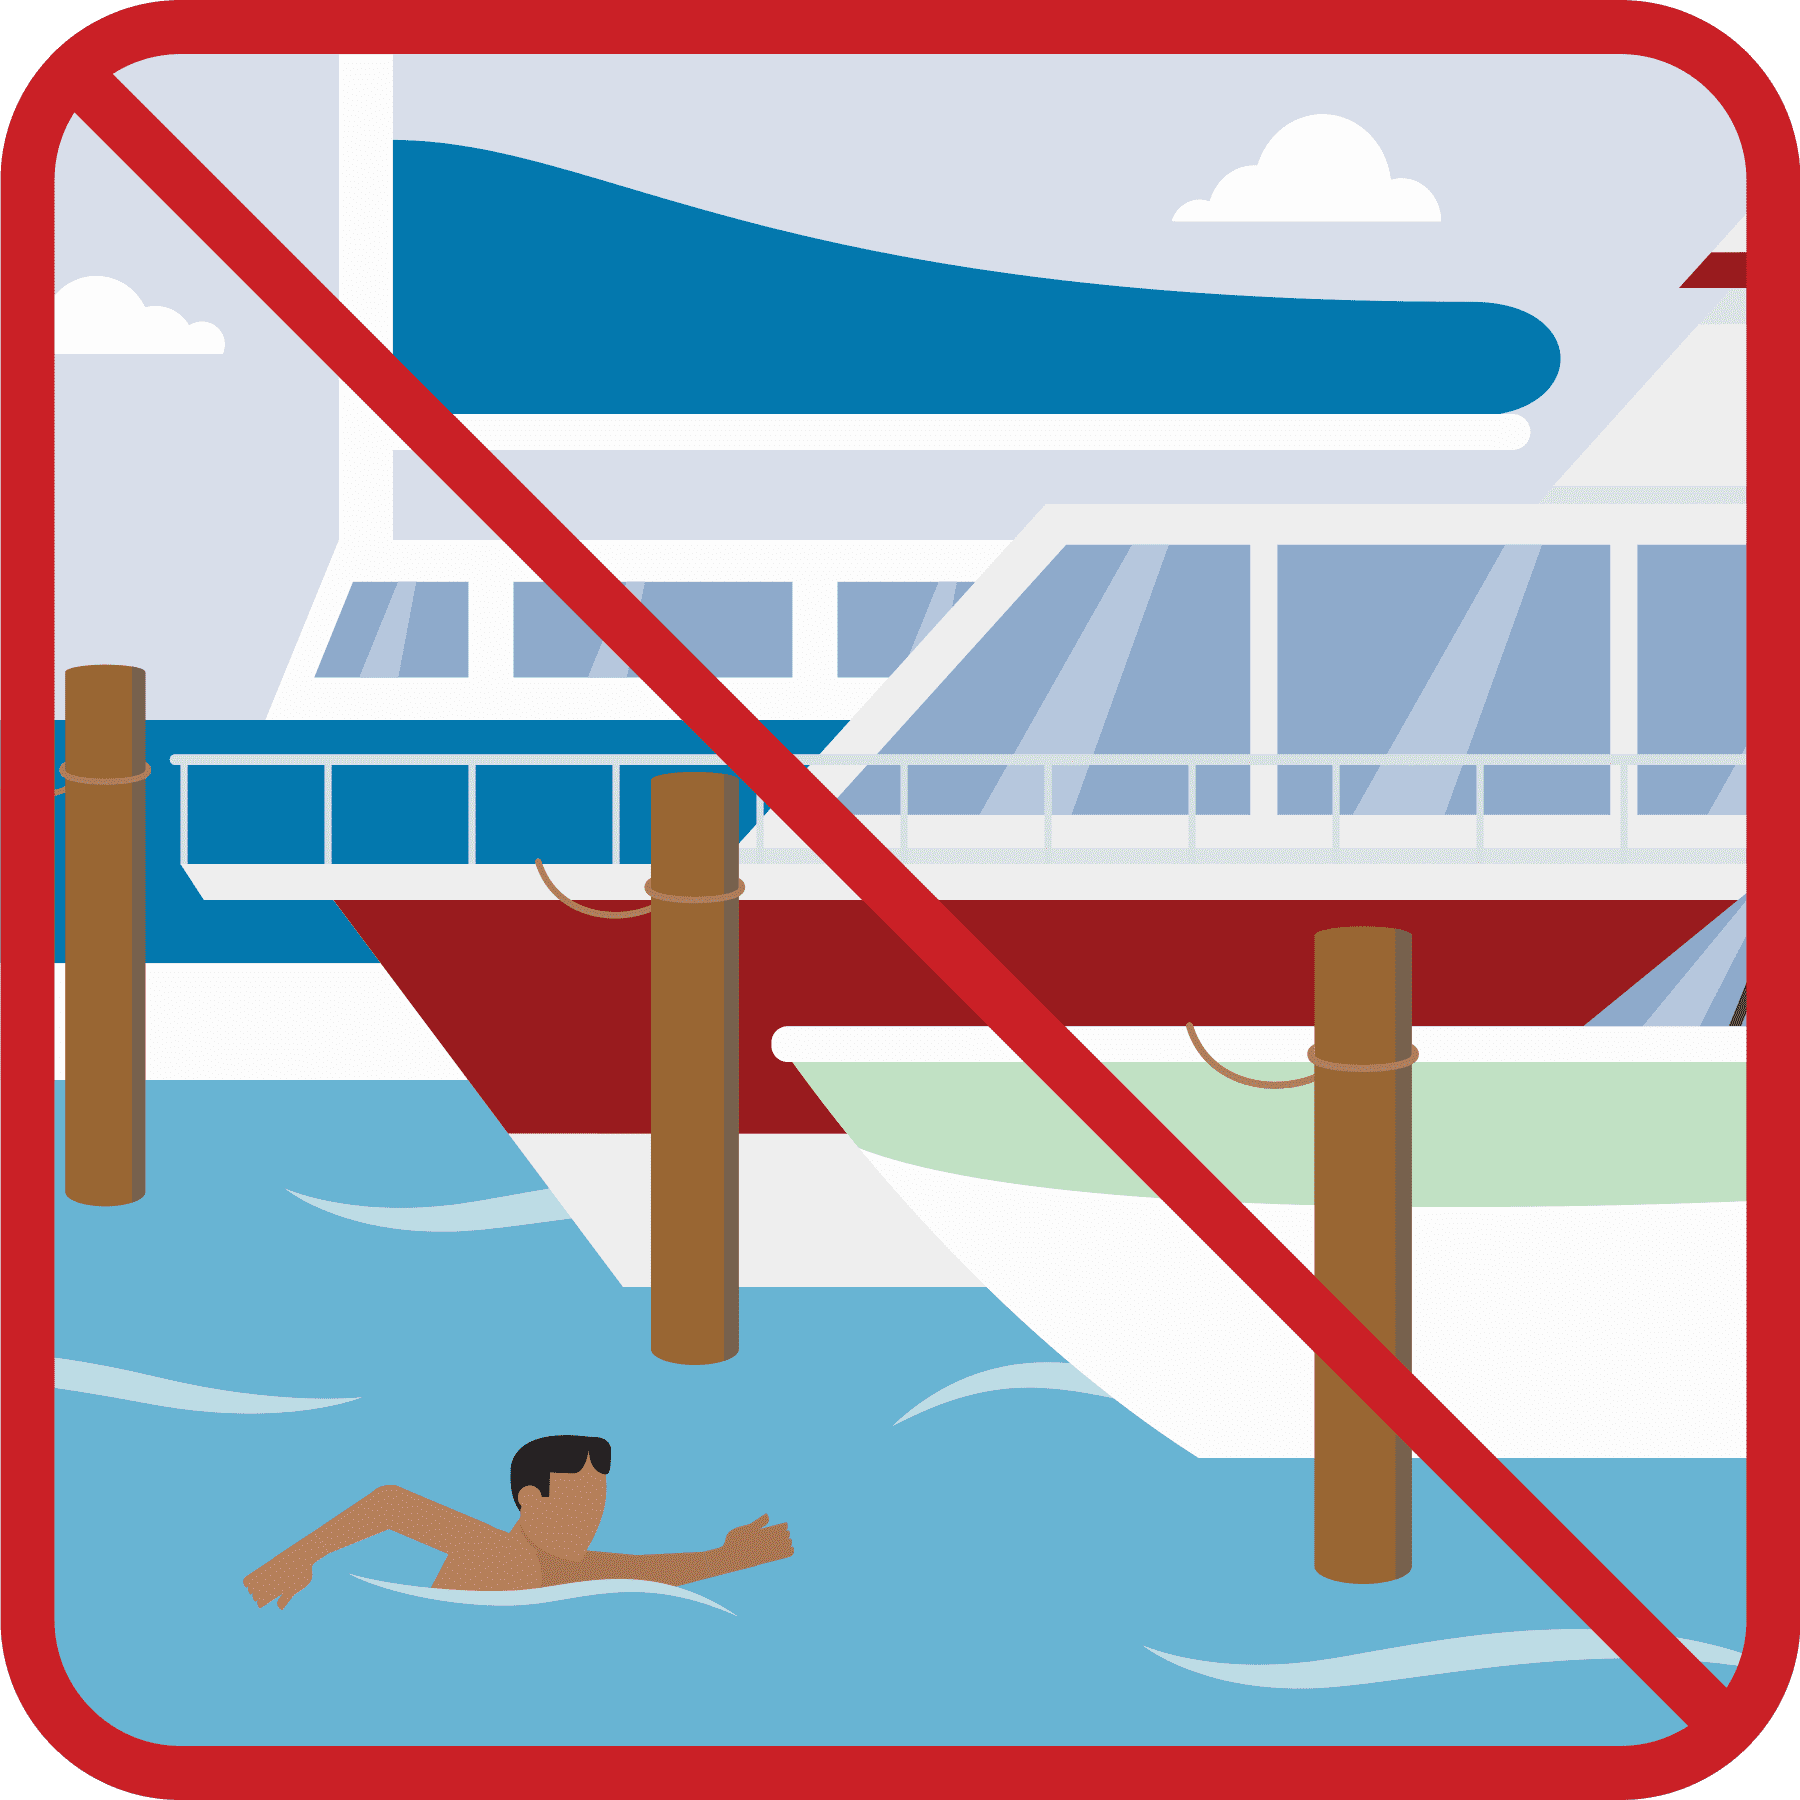 Graphic showing person swimming near a boat with an X over the image